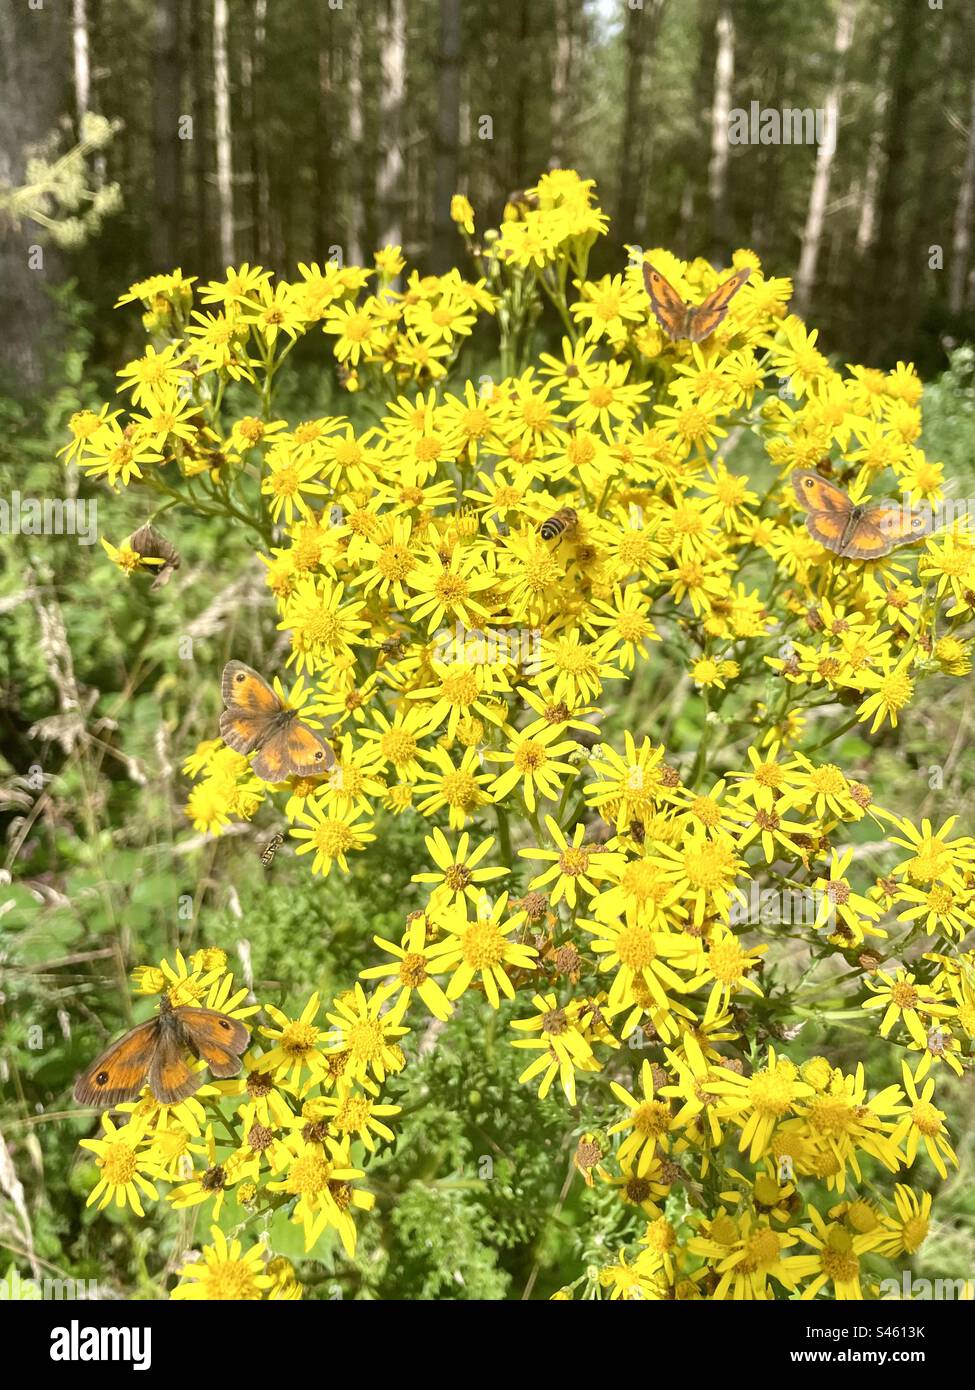 The bright yellow flowers of the Jacobaea vulgaris or Senecio jacobaea plant attracting numbers of the Gatekeeper butterfly (also known as Hedge brown) Stock Photo